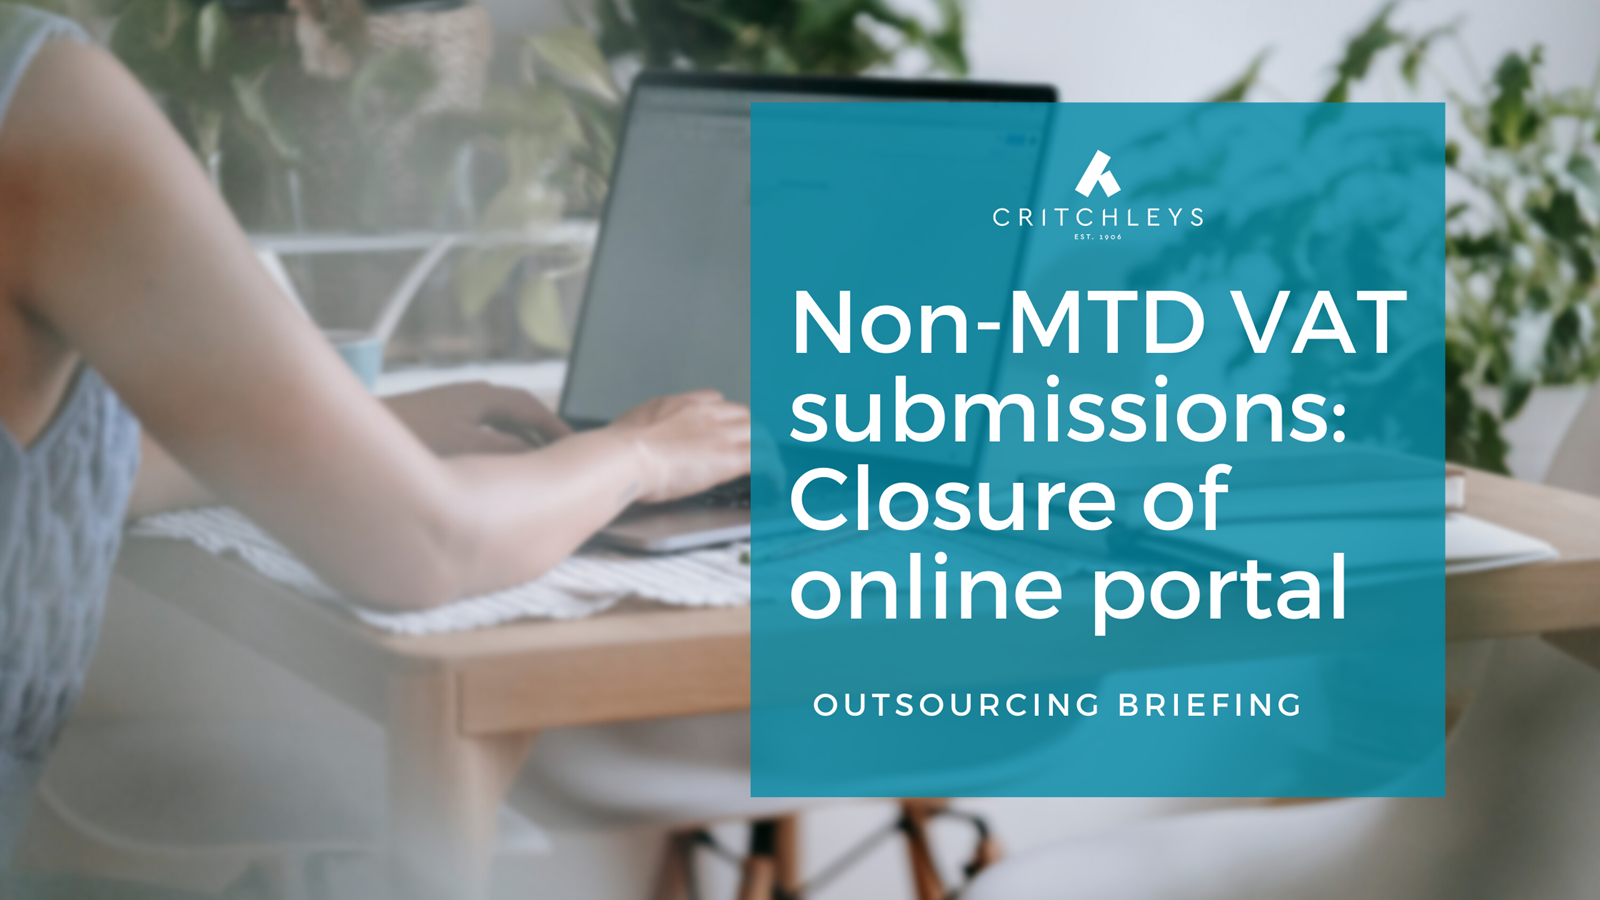 Non-MTD VAT submissions: Closure of online portal